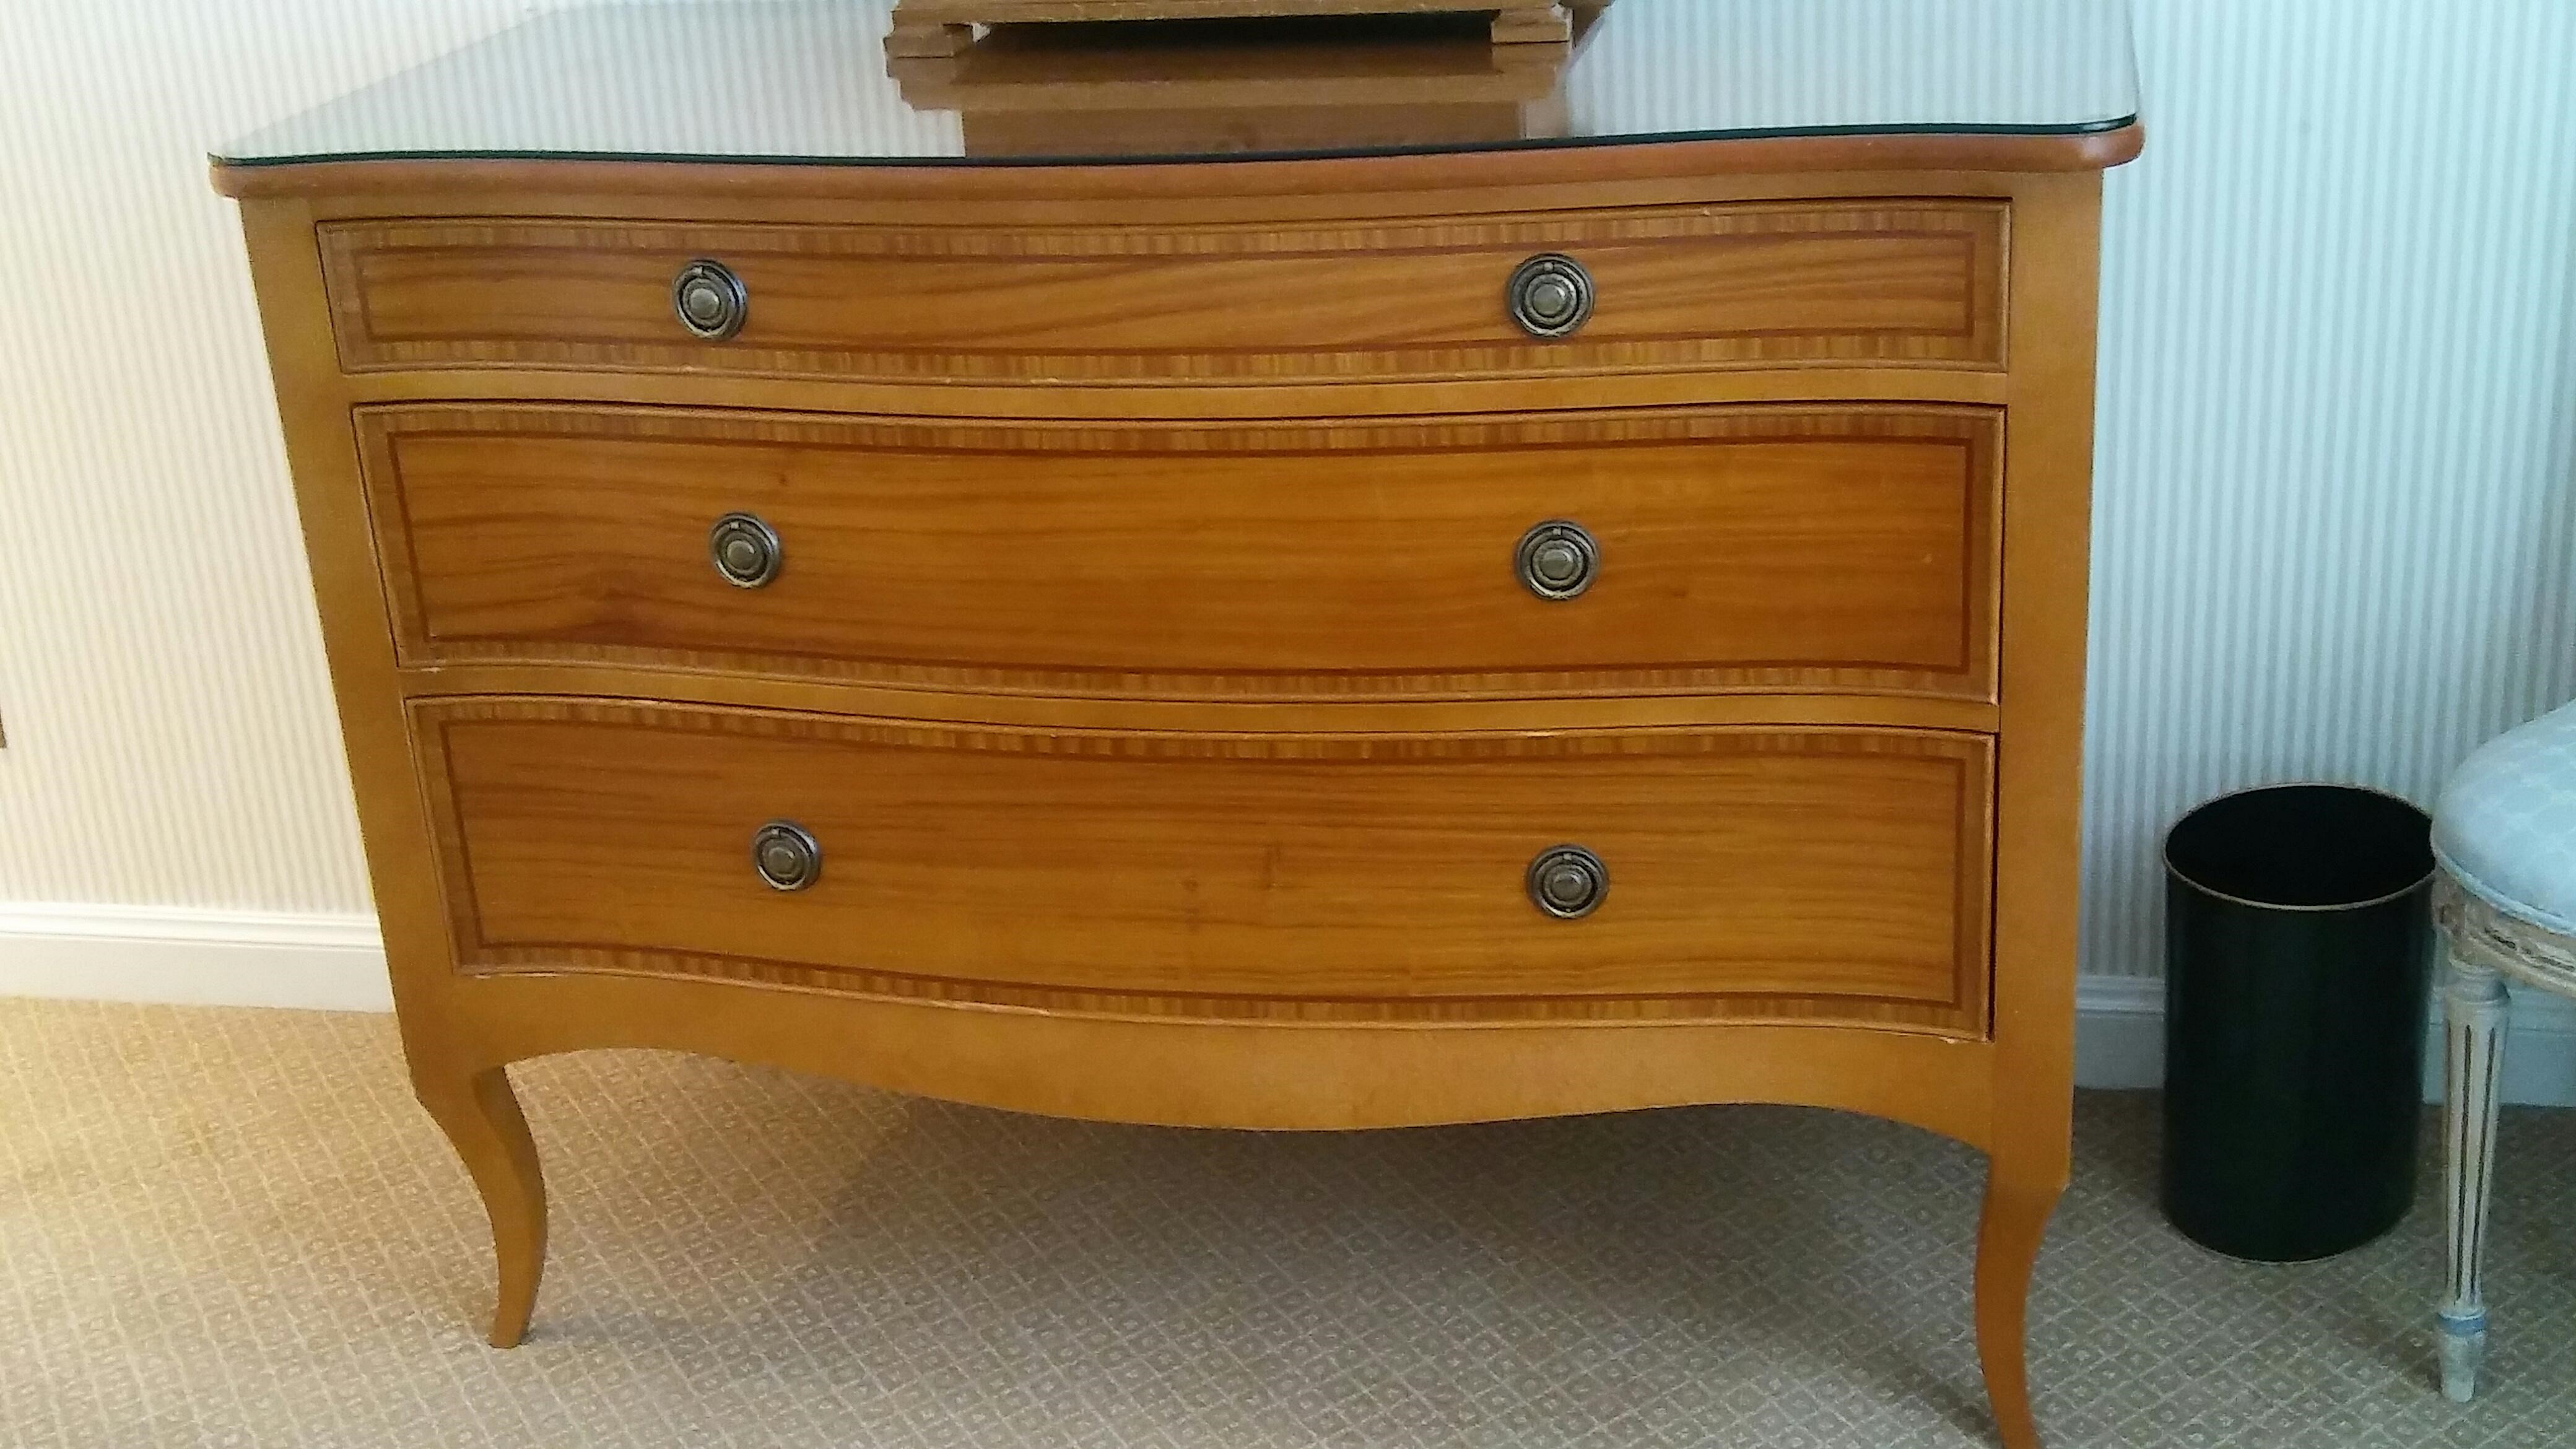 Three drawer chest of drawers with glass top - serpentine shaped front with sabre style front legs